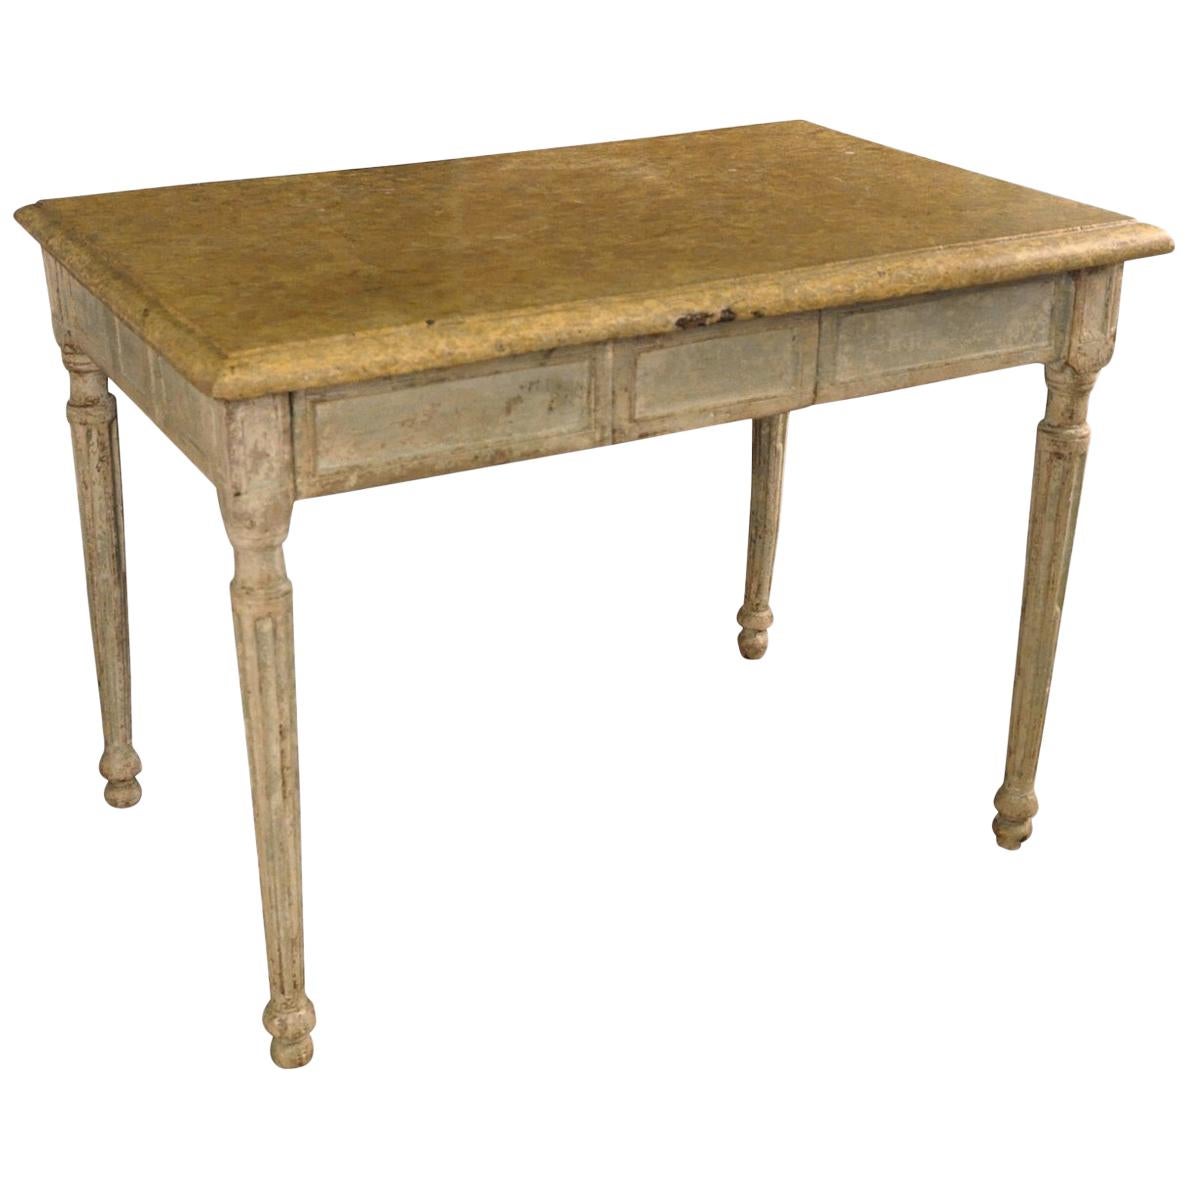 Outstanding 18th Century Period Louis XVI Table